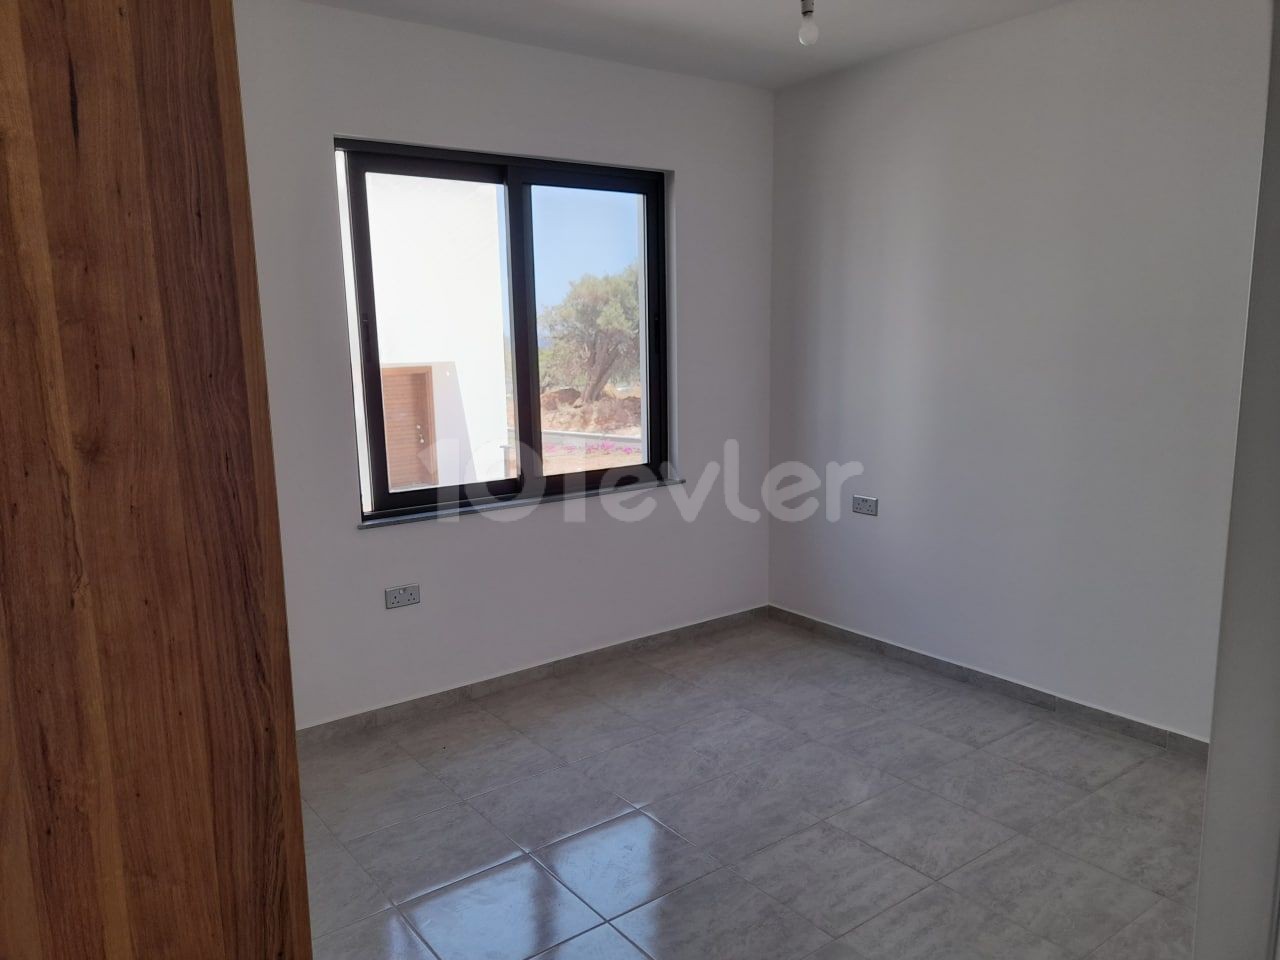 1+1 Apartment for sale in Esentepe, wıth communıty pool